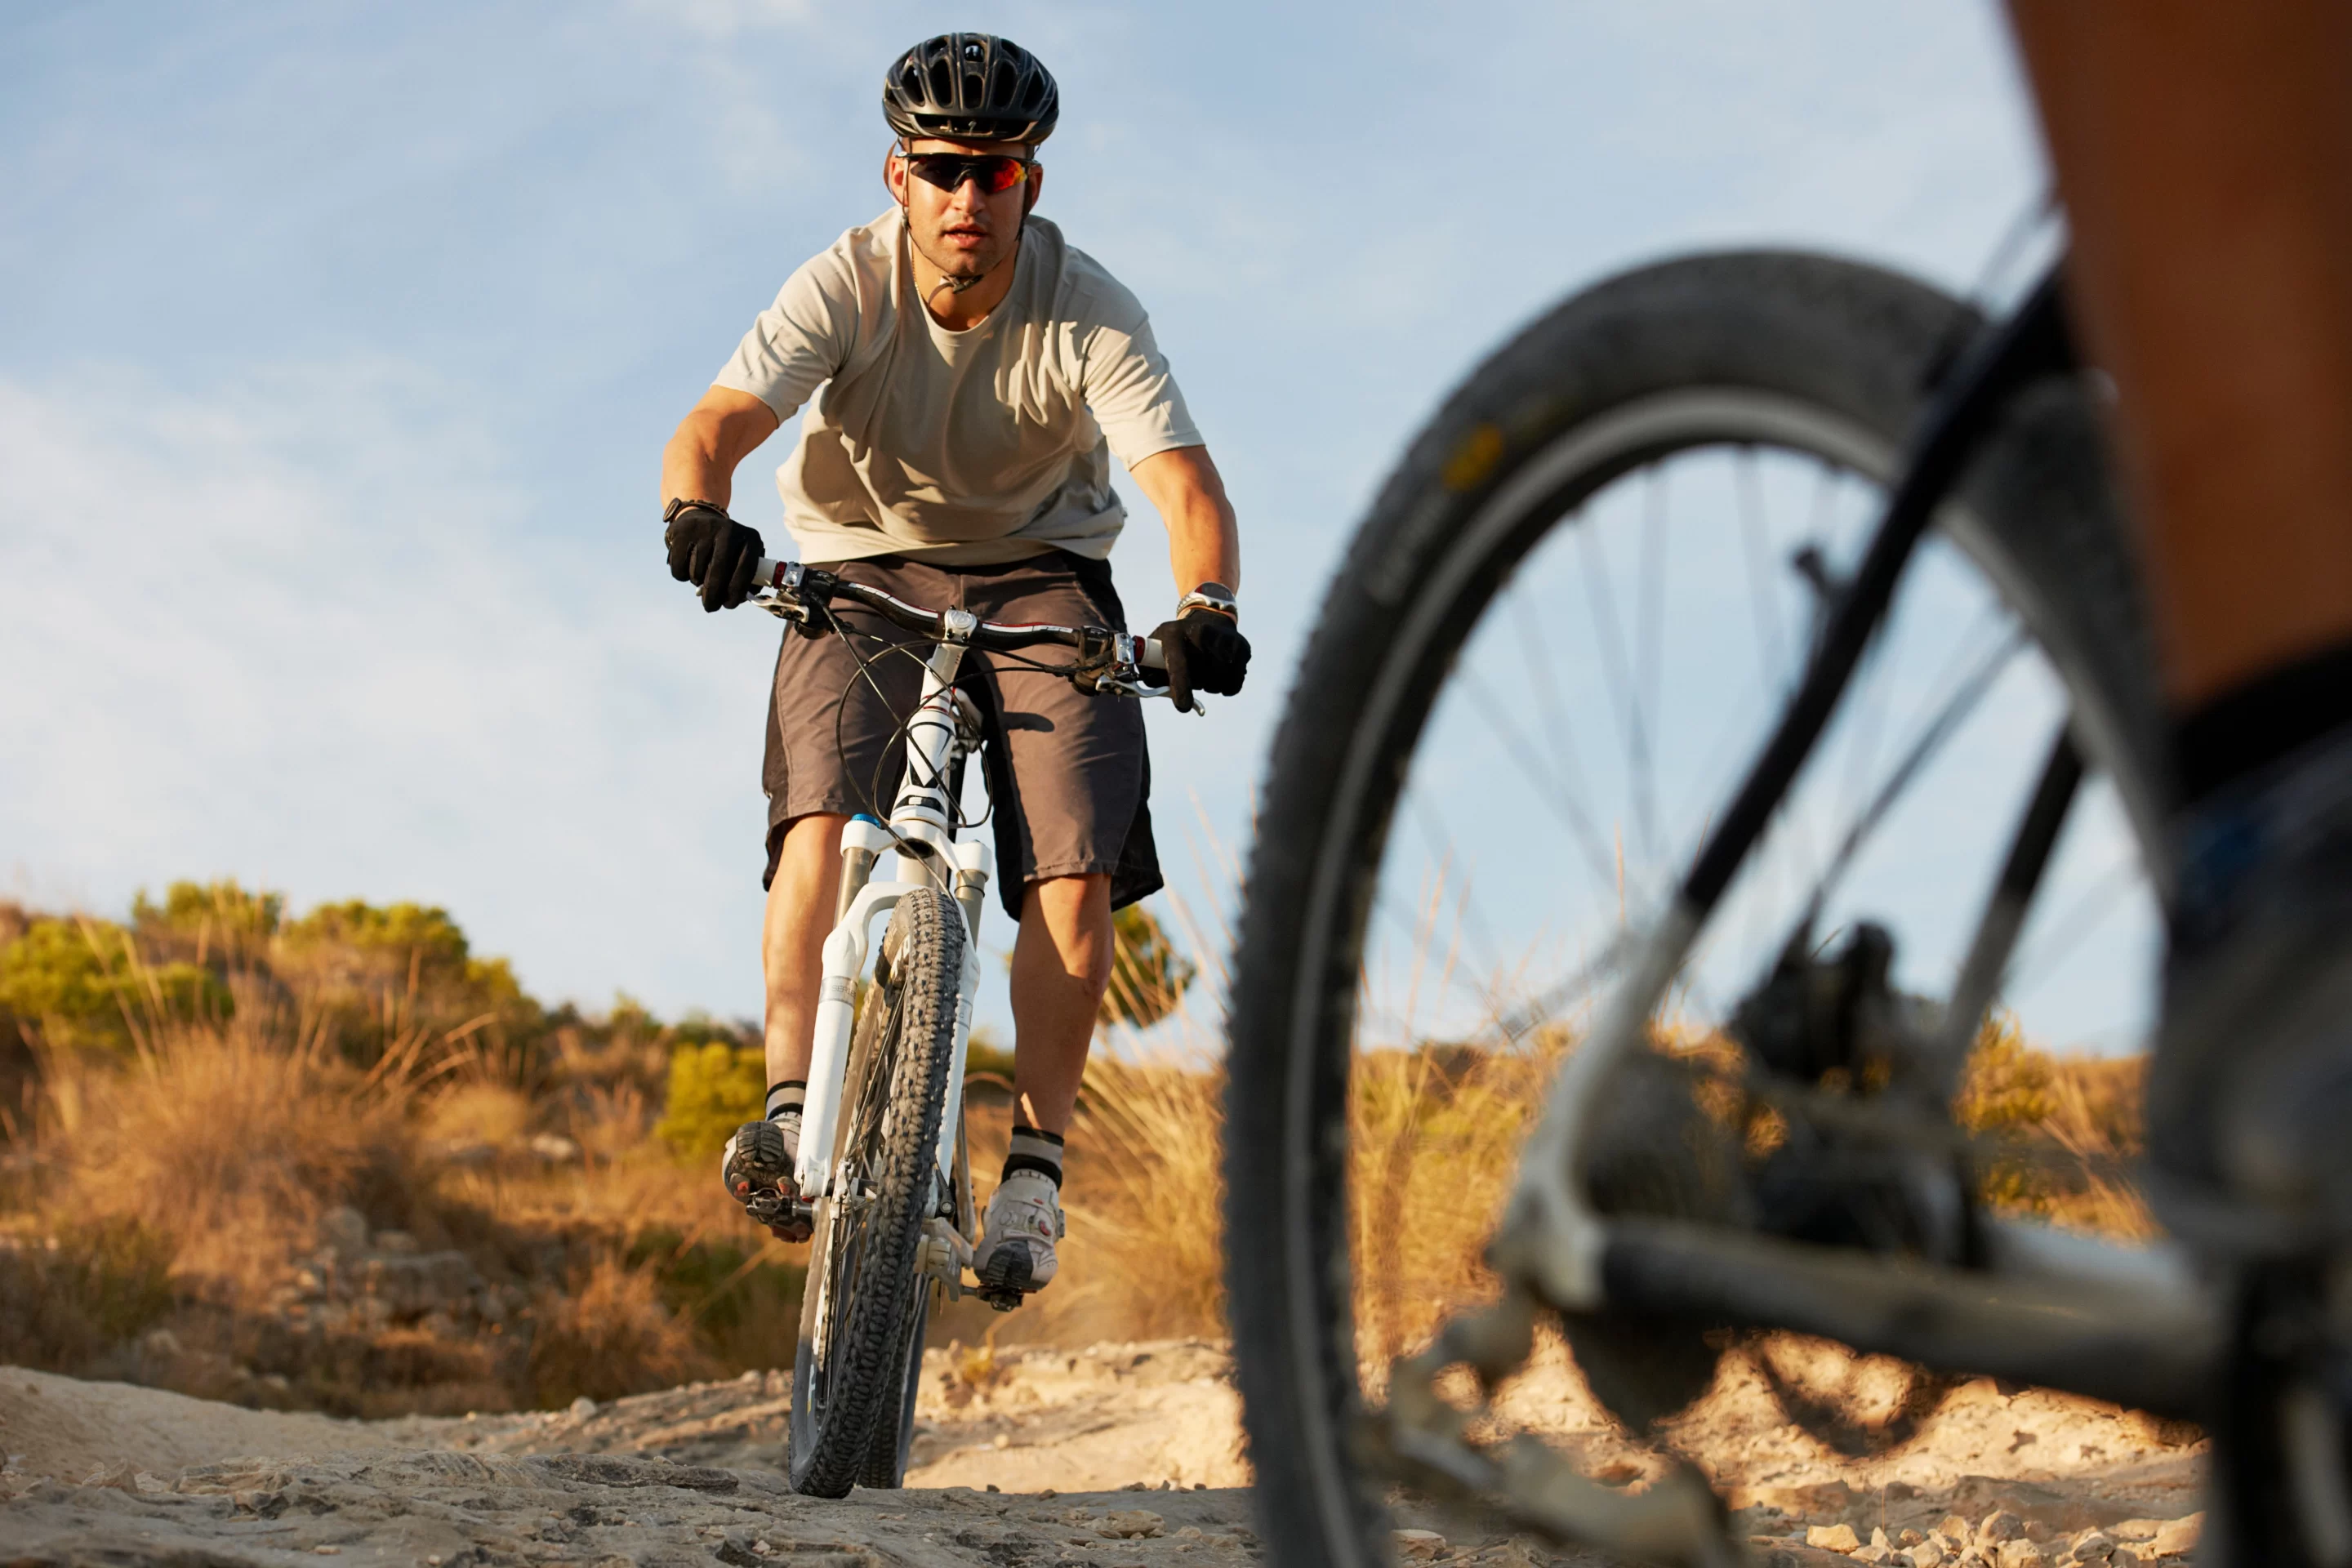 Experience the thrill of mountain biking amidst the stunning landscapes of Las Catalinas.